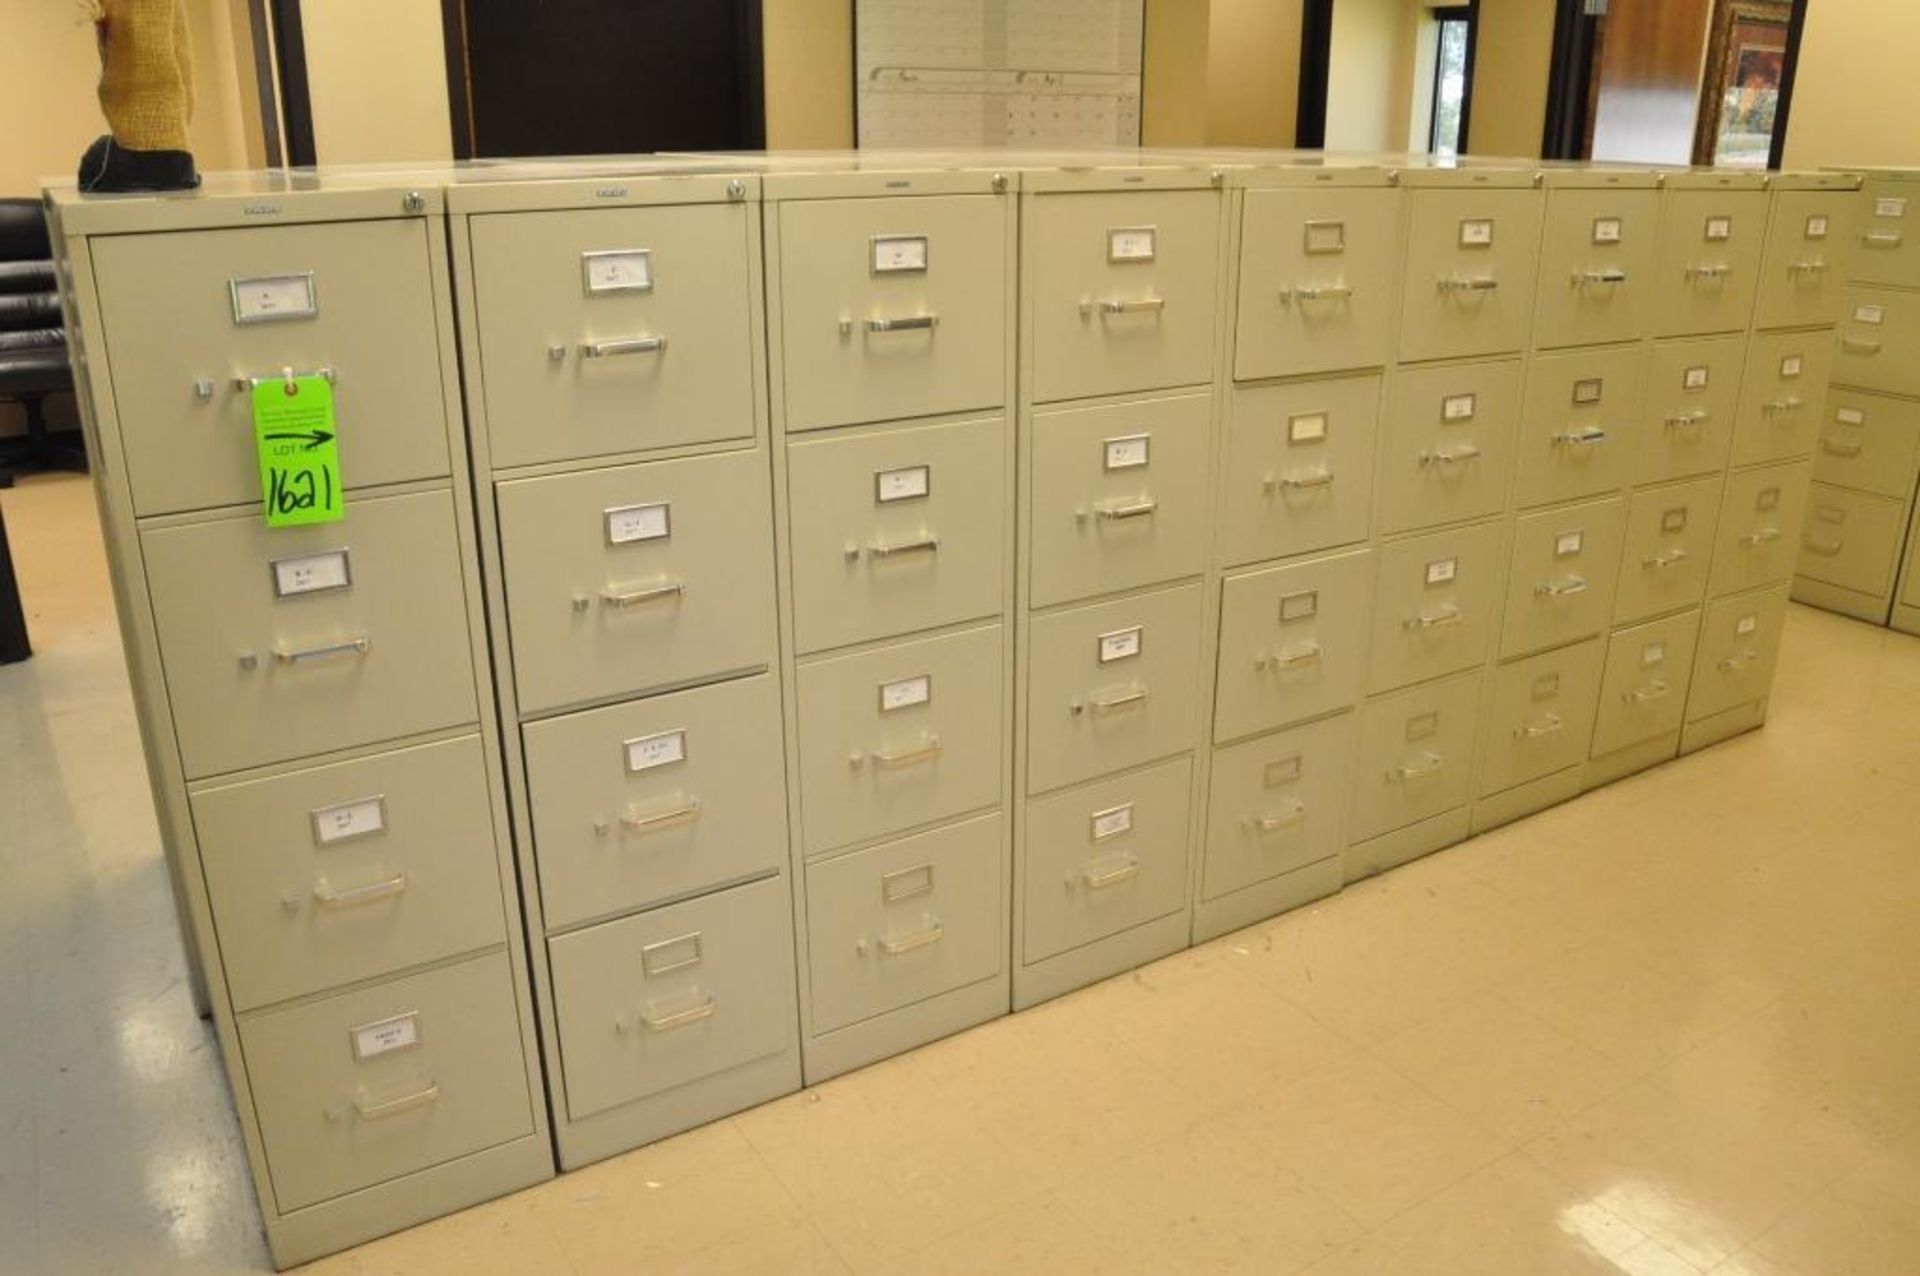 Lot-(9) HON 4-Drawer File Cabinets in (1) Row, (Main)